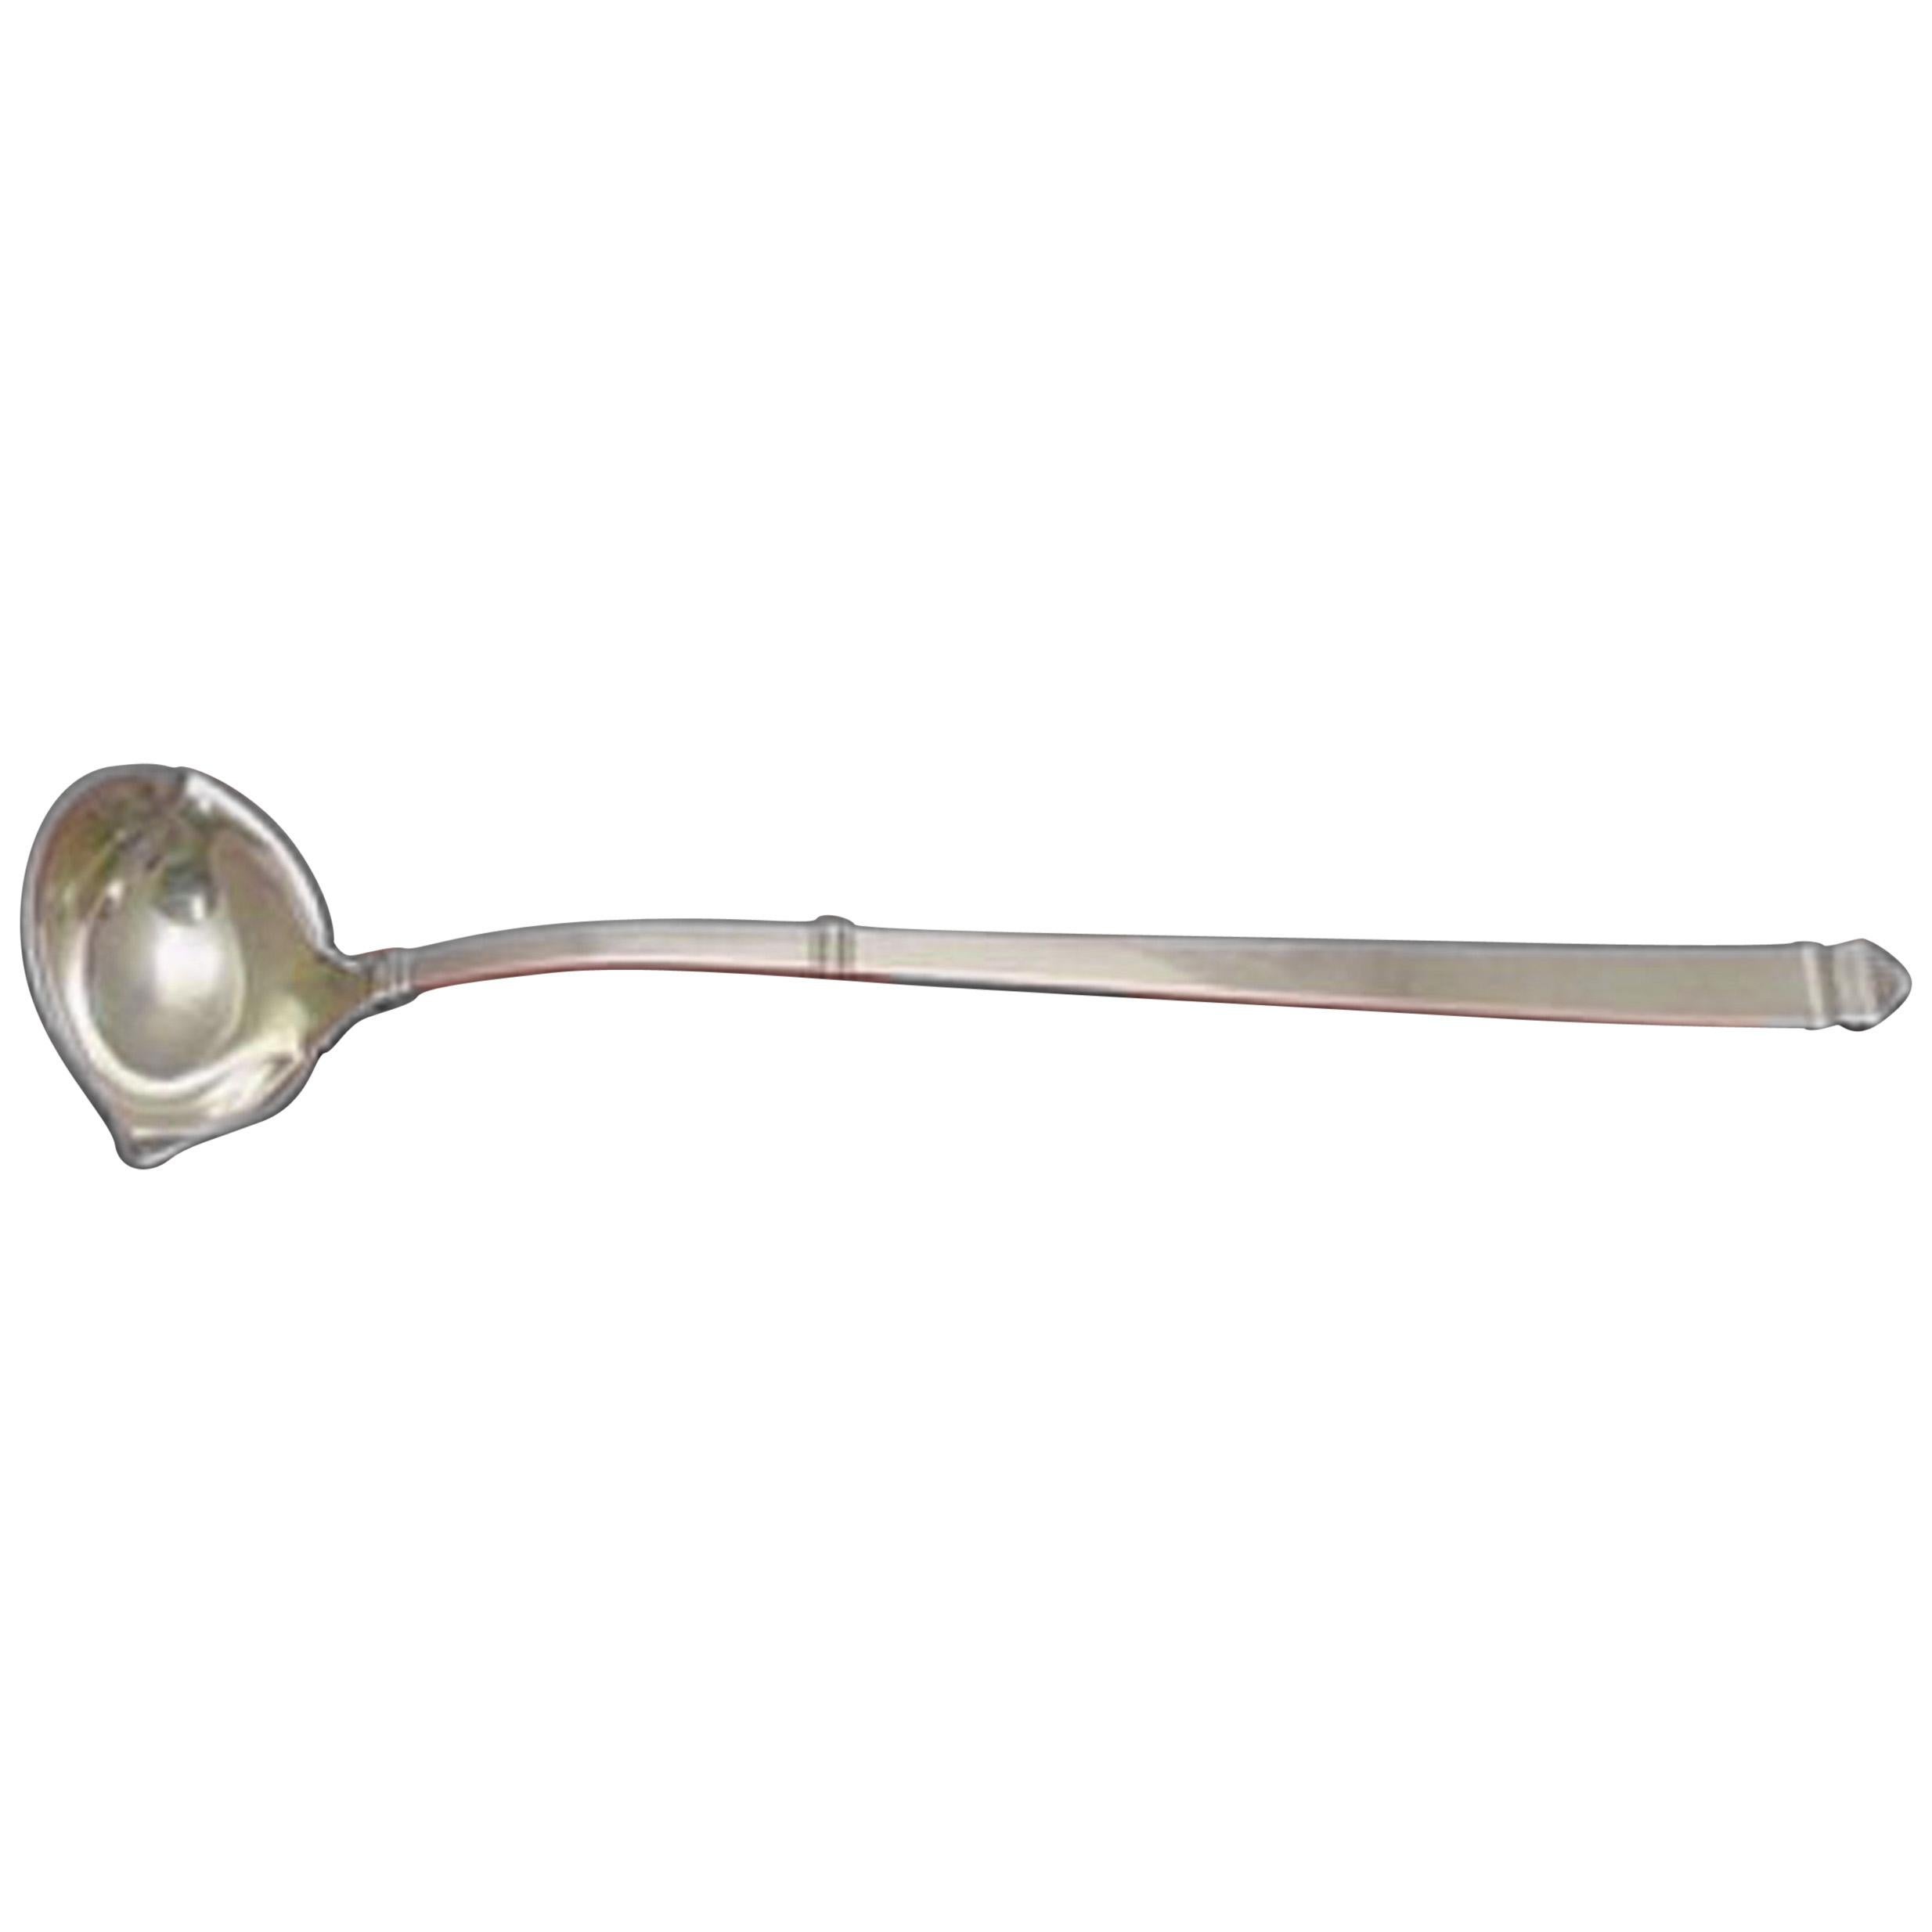 Hampton by Tiffany & Co. Sterling Silver Punch Ladle with Button